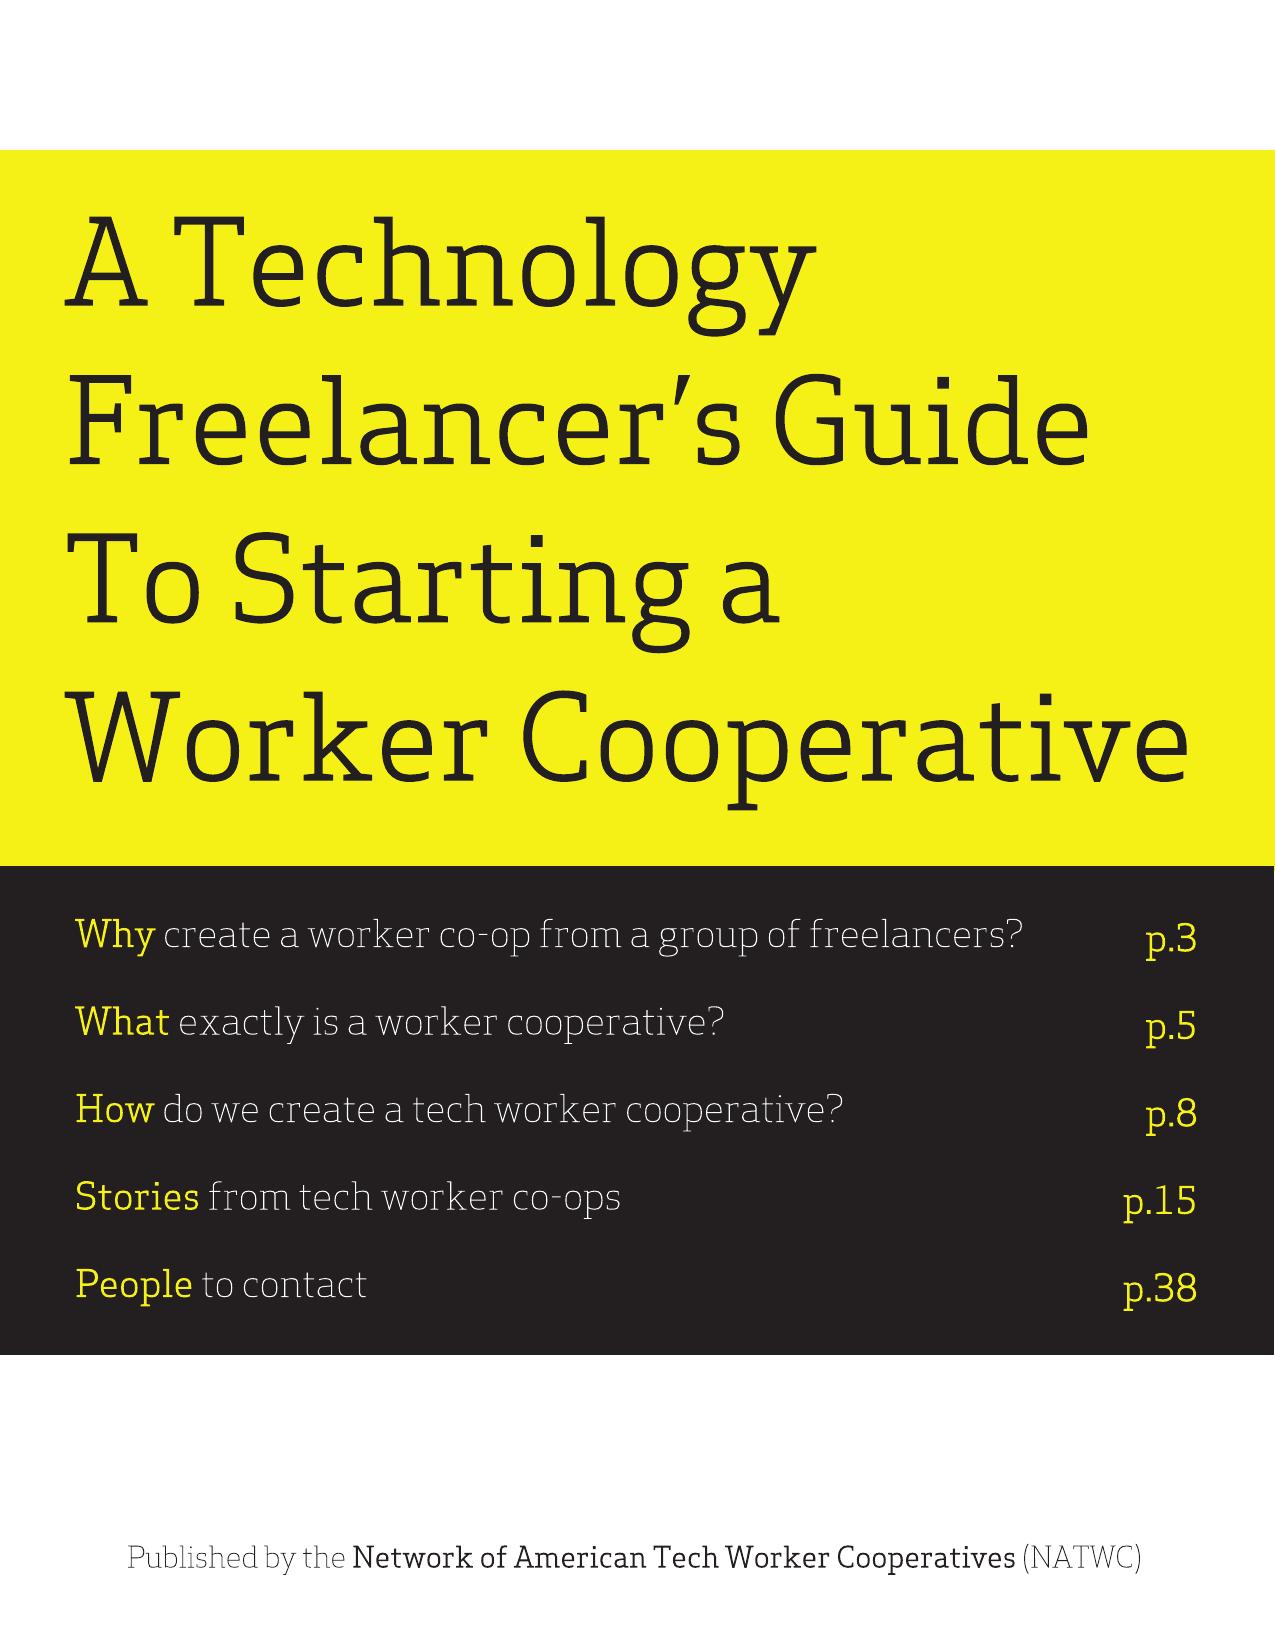 A Technology Freelancer's Guide To Starting A Worker Cooperative